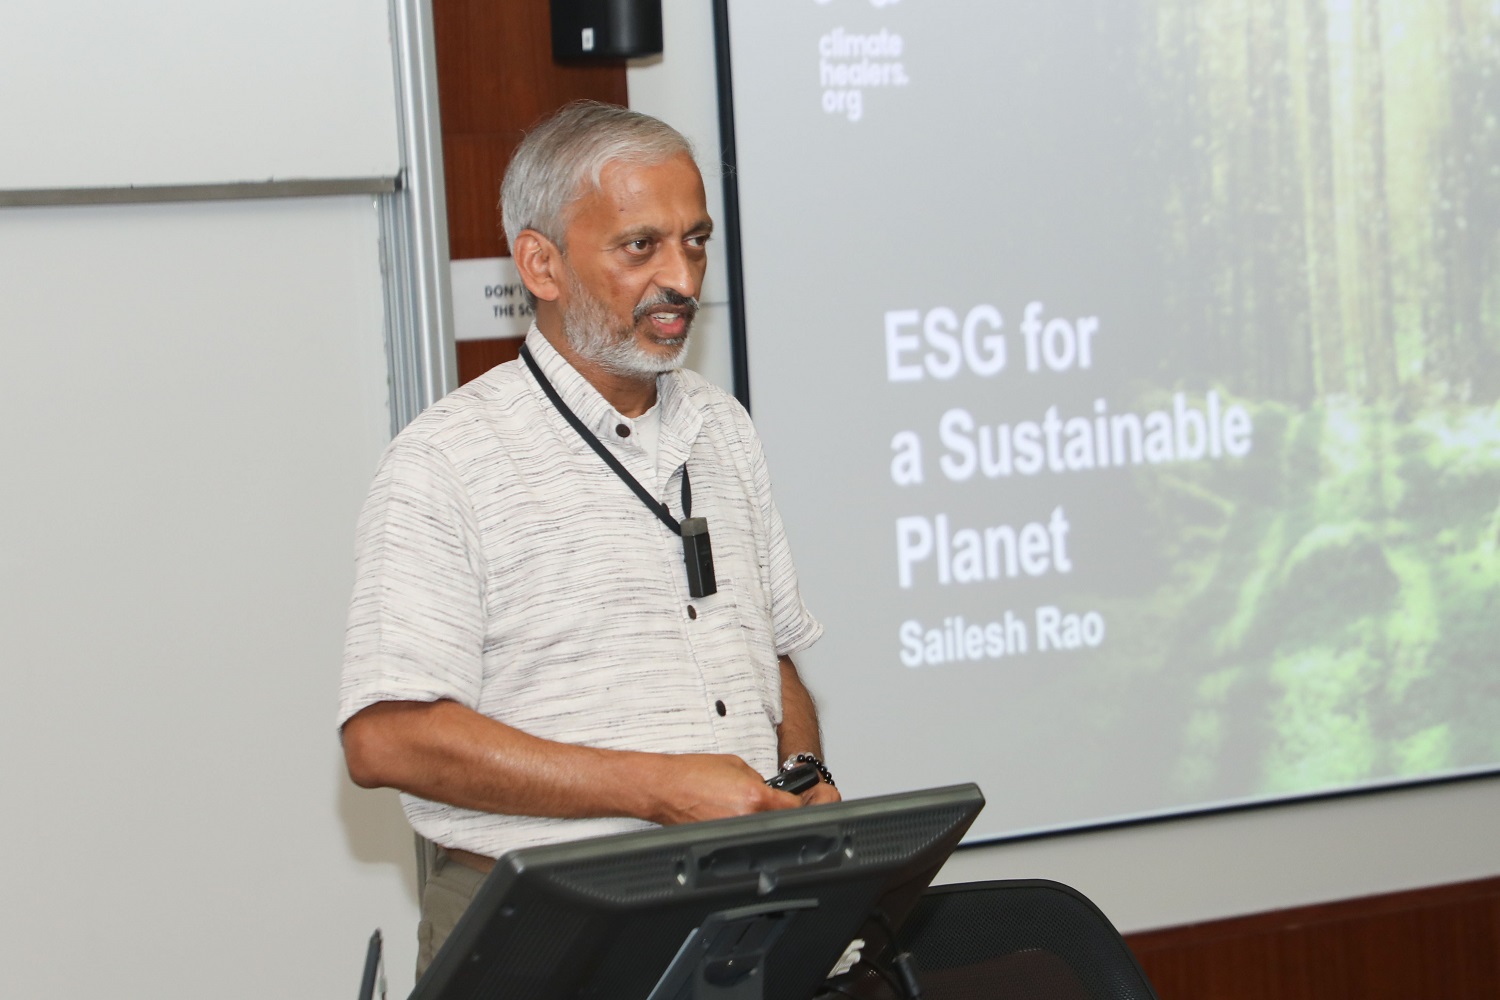 The Centre for Public Policy organized a seminar on ‘ESG for a Sustainable Planet’ by eminent author and speaker on climate change and sustainability, Dr. Sailesh Rao, on 16th November 2023.